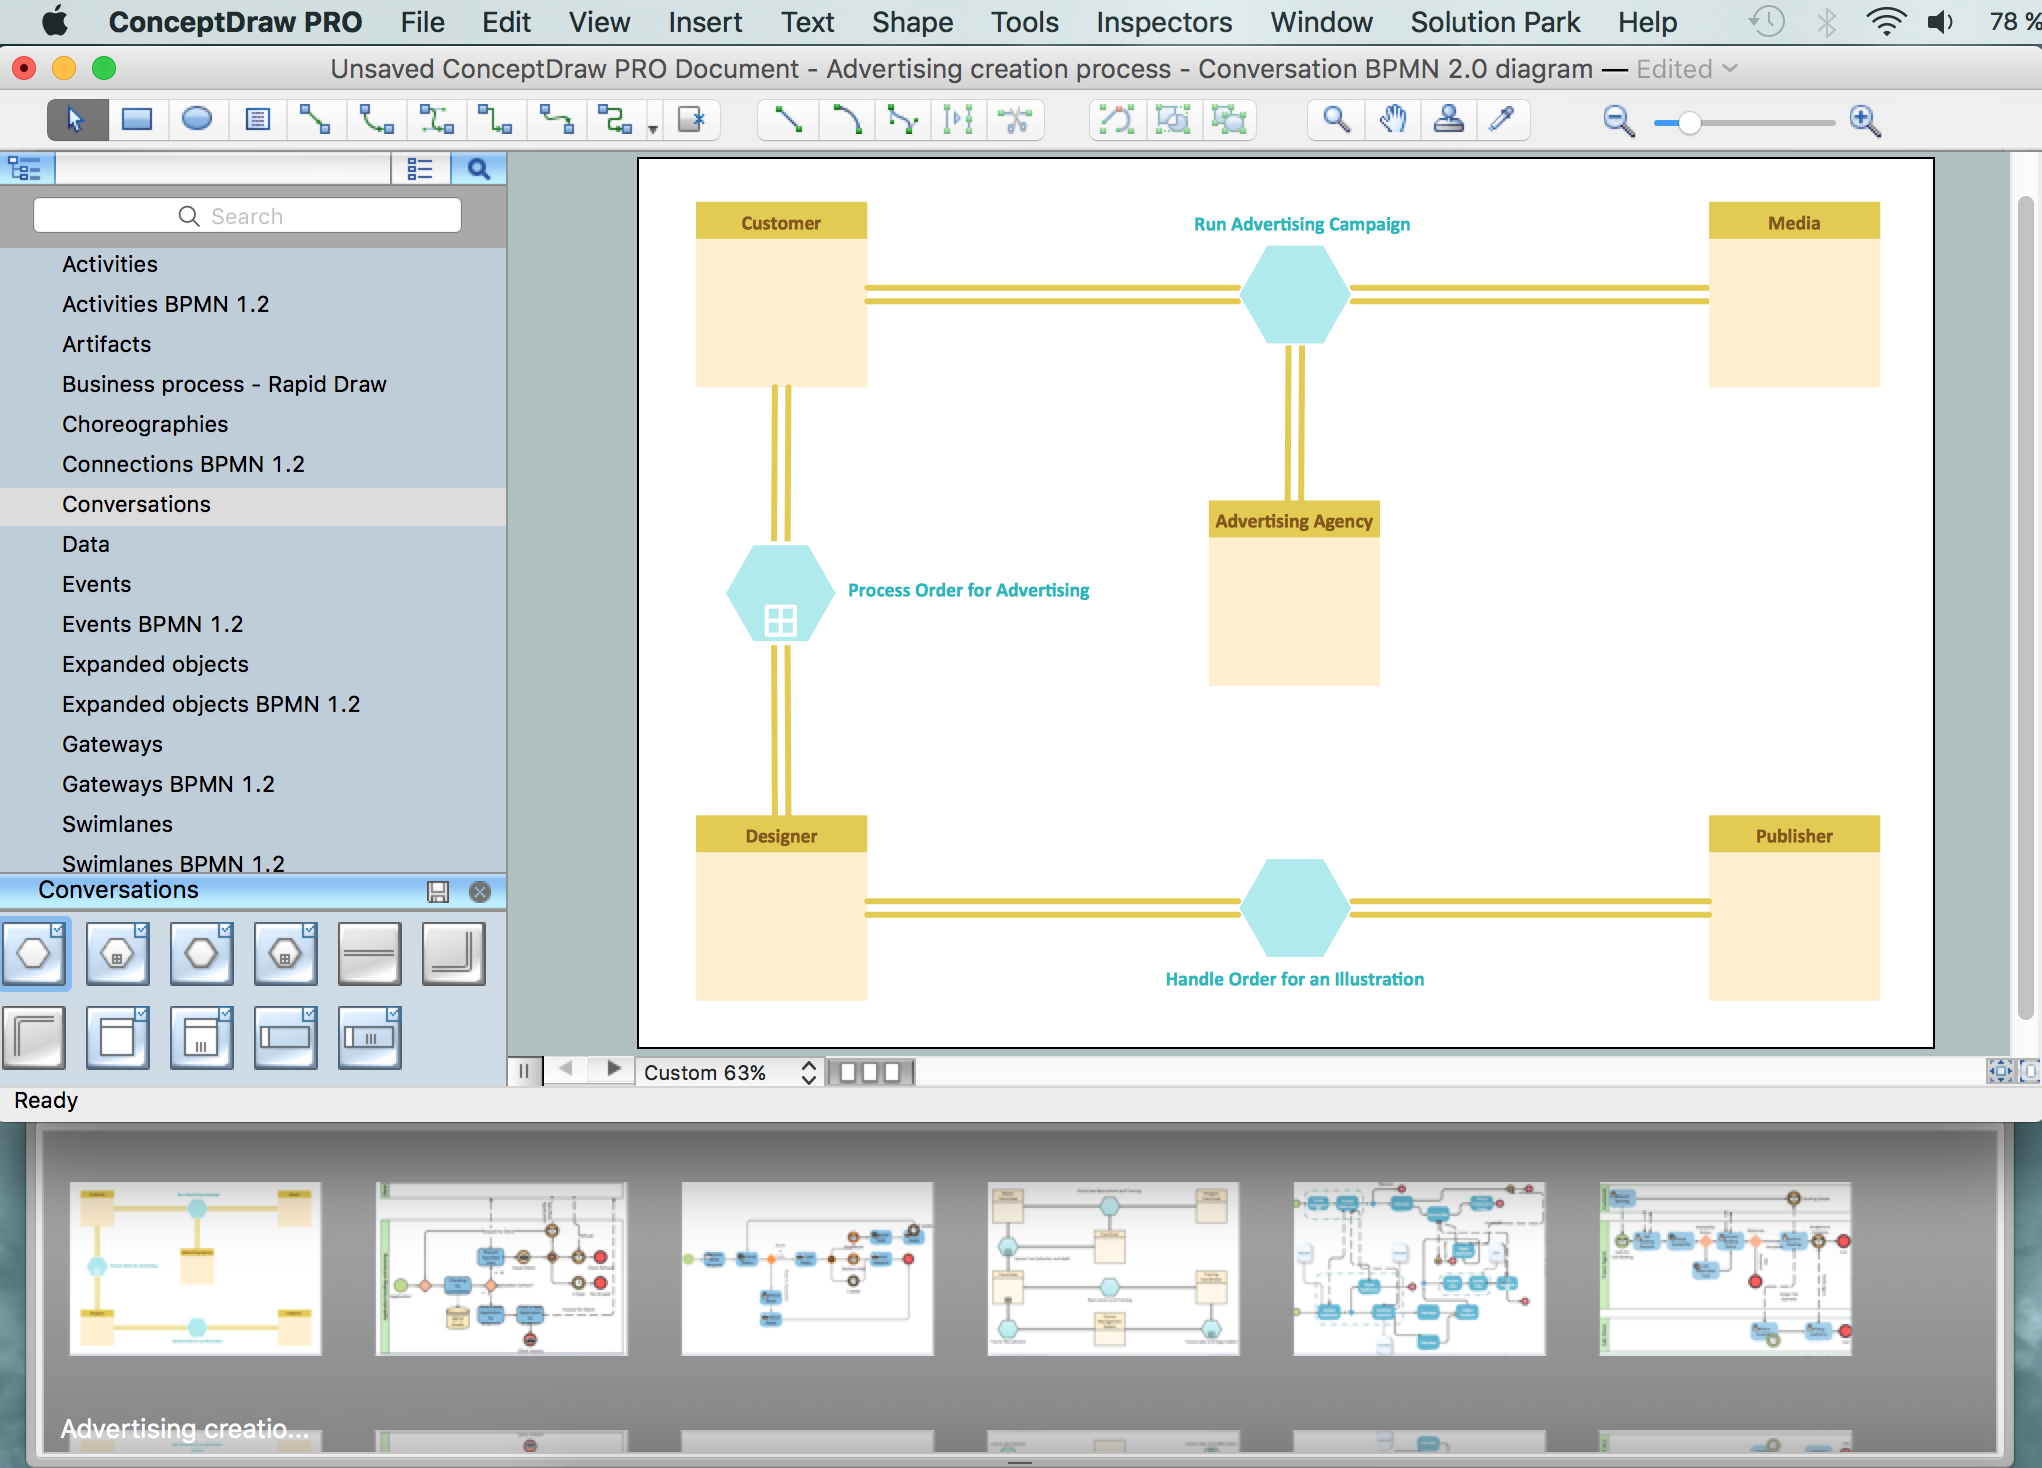 The Best Business Process Modeling Software Features To Draw Diagrams